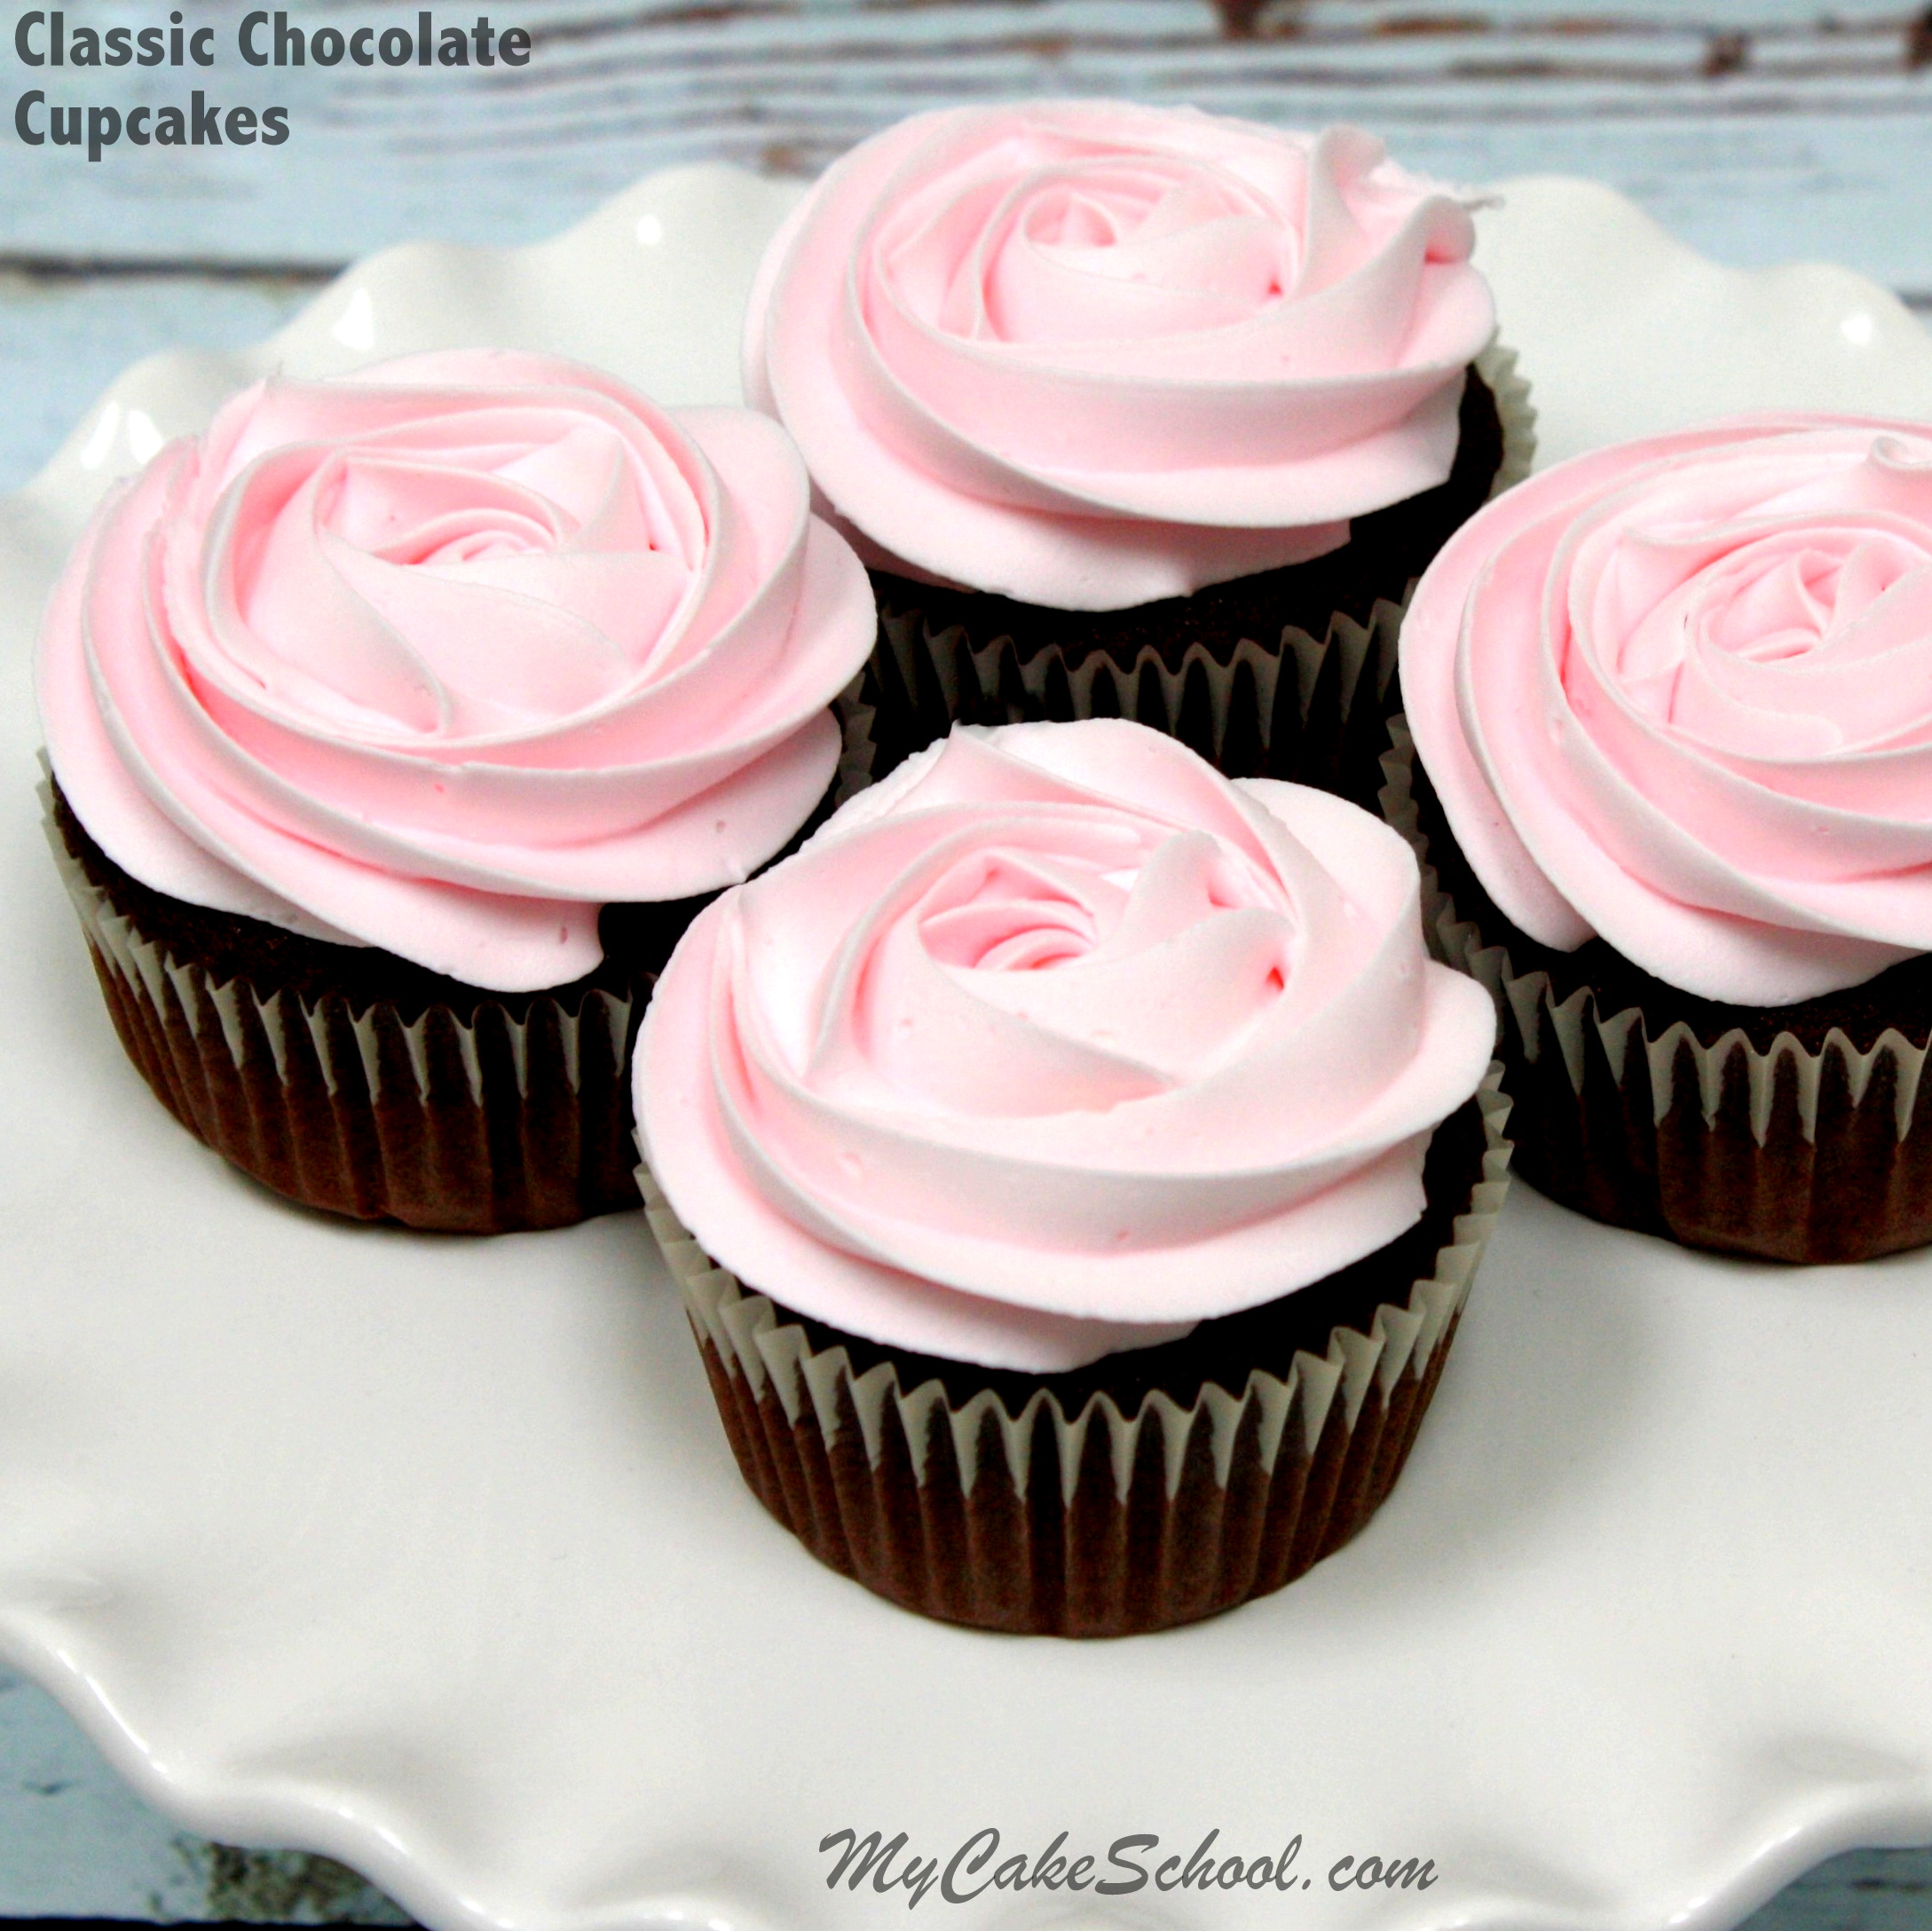 Classic Chocolate Cupcakes from Scratch | My Cake School